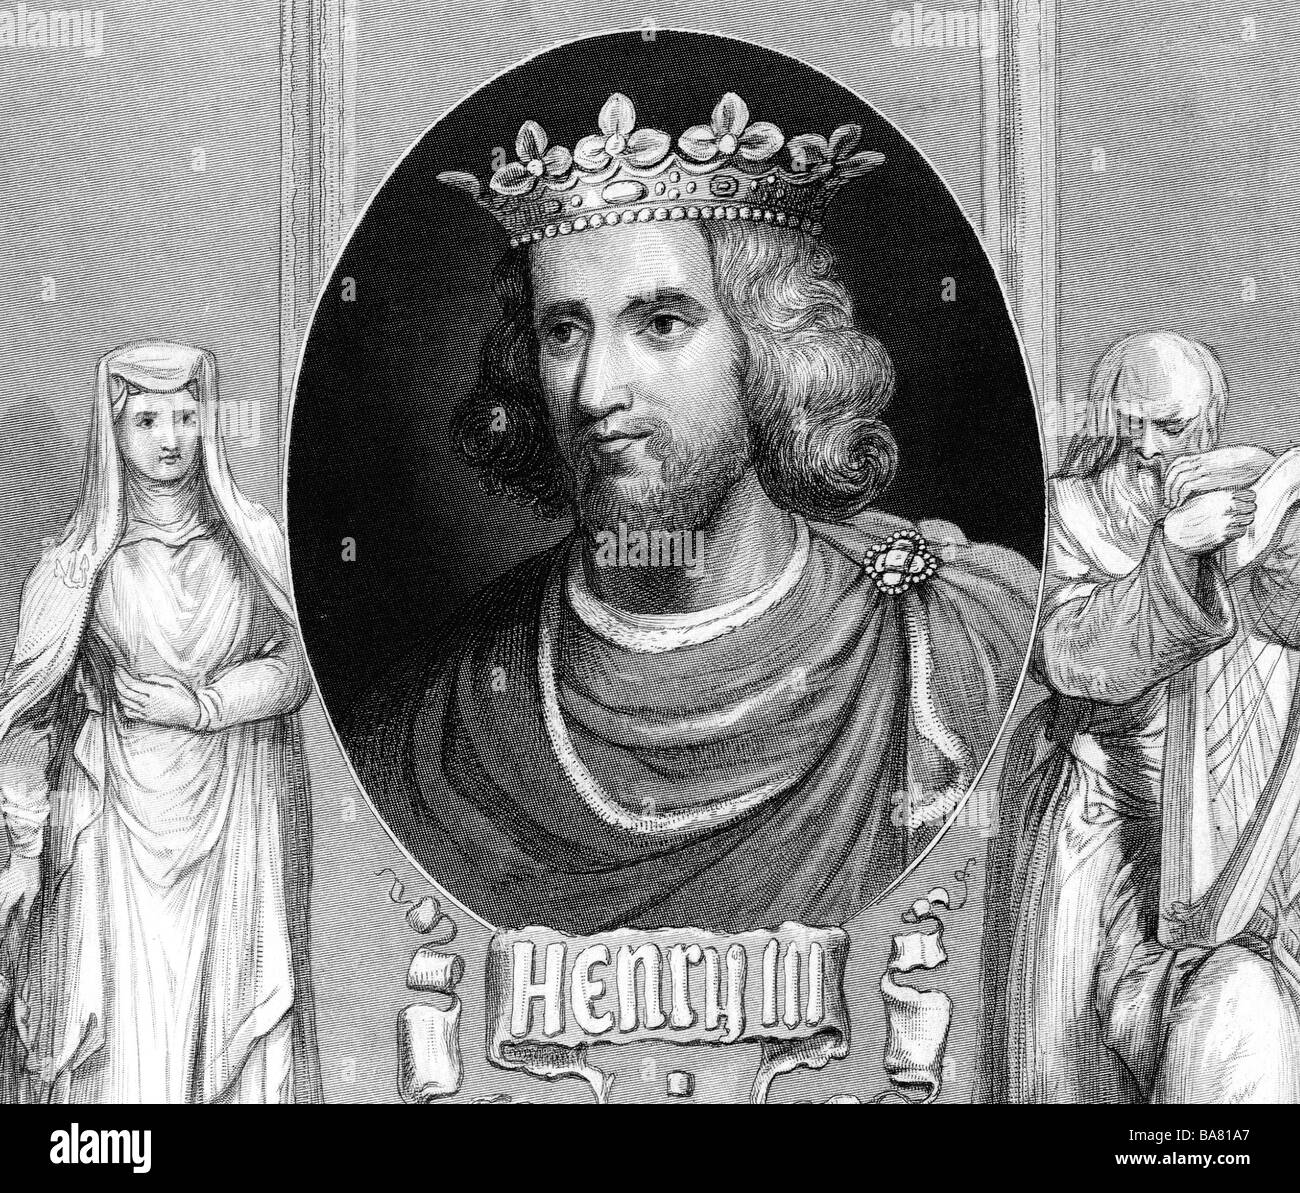 King charles coronation portrait Black and White Stock Photos & Images ...